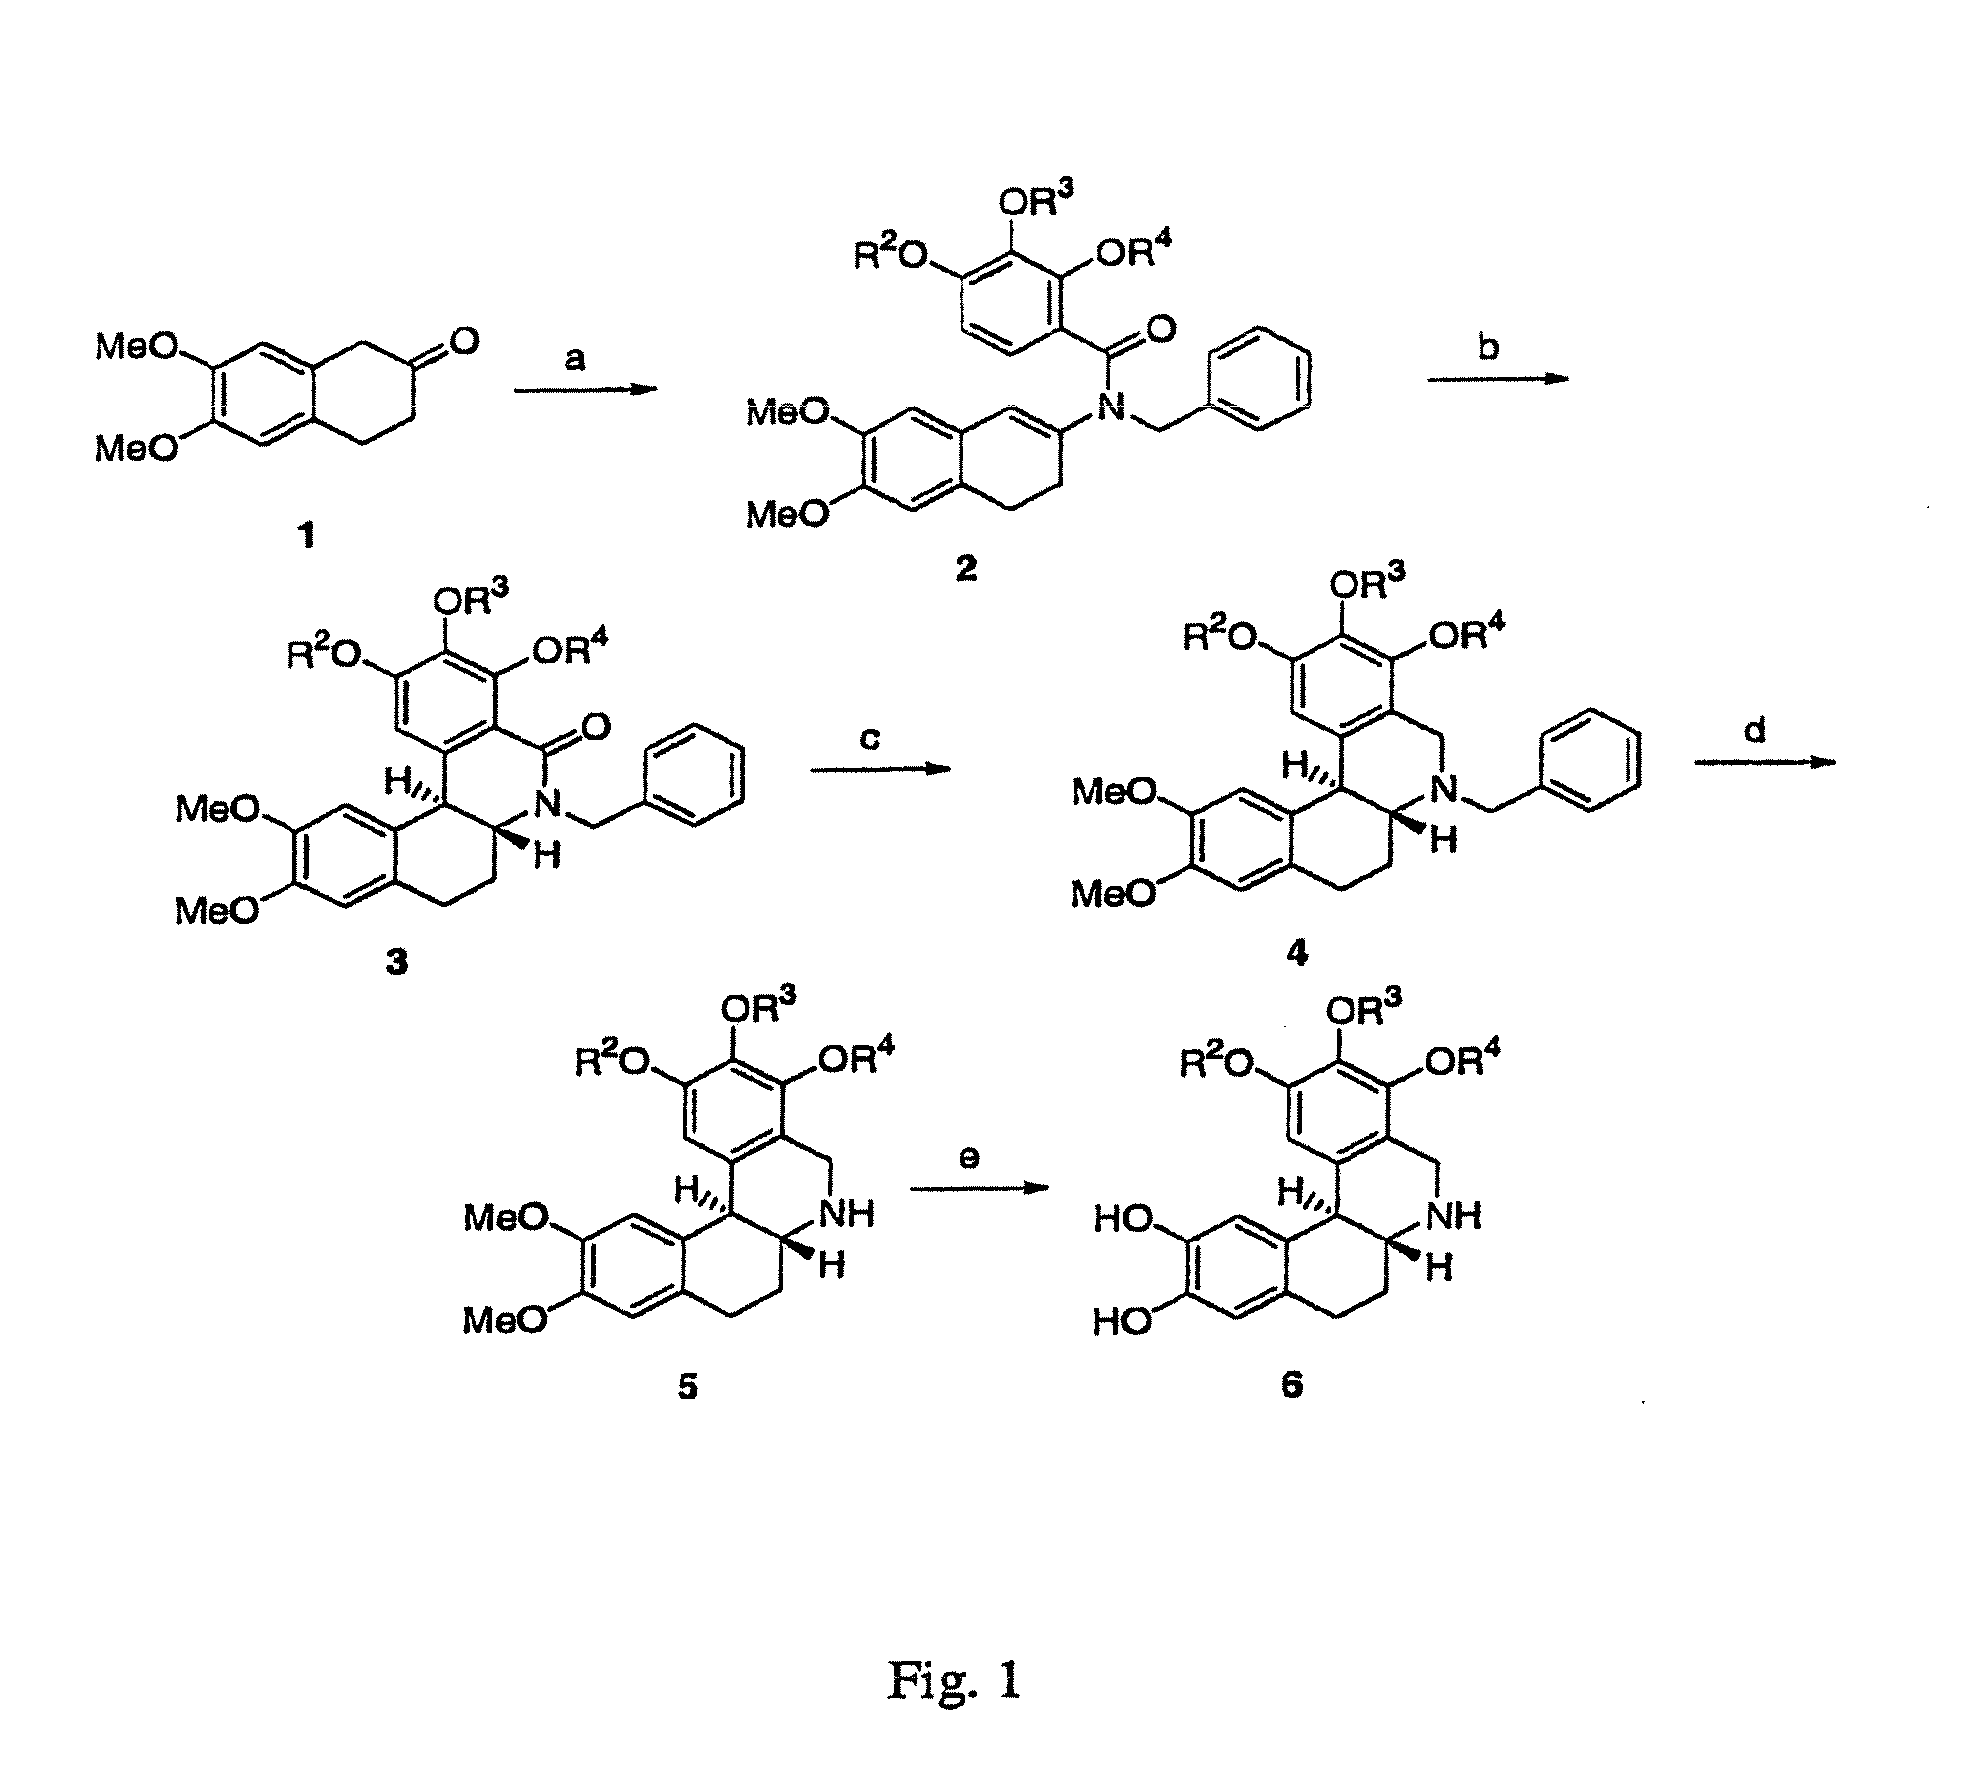 Co-Administration of Dopamine-Receptor Binding Compounds